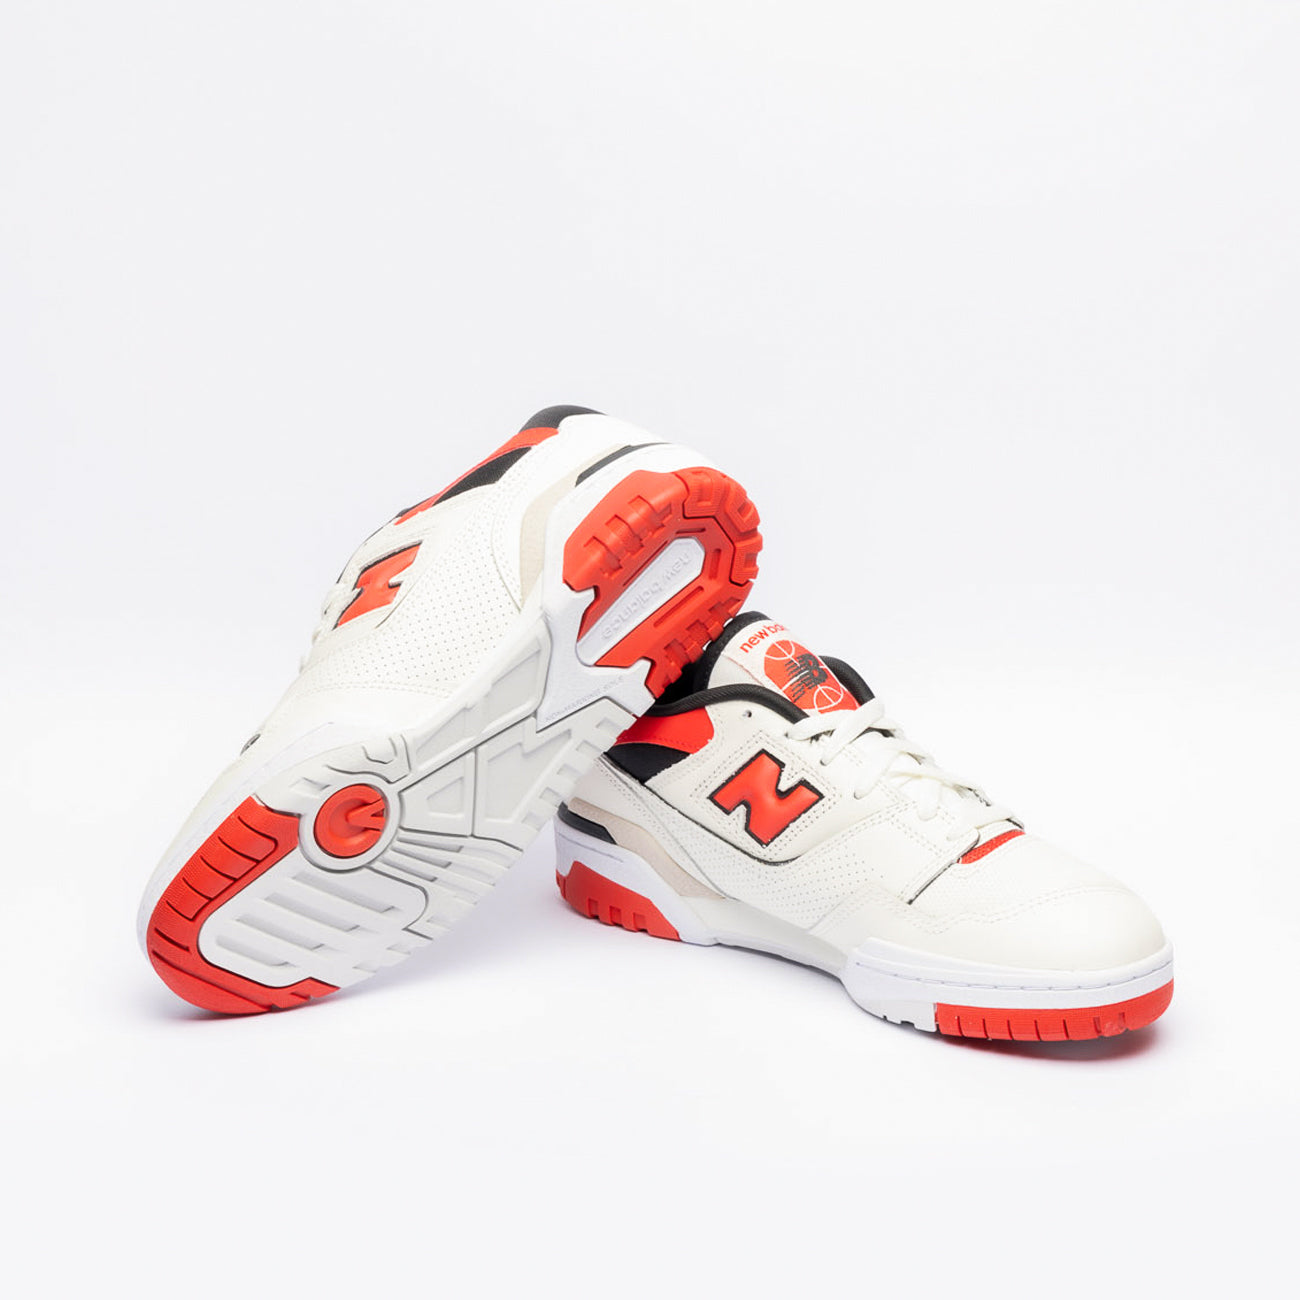 New Balance BB55VTB low basketball sneaker in cream leather and red detail